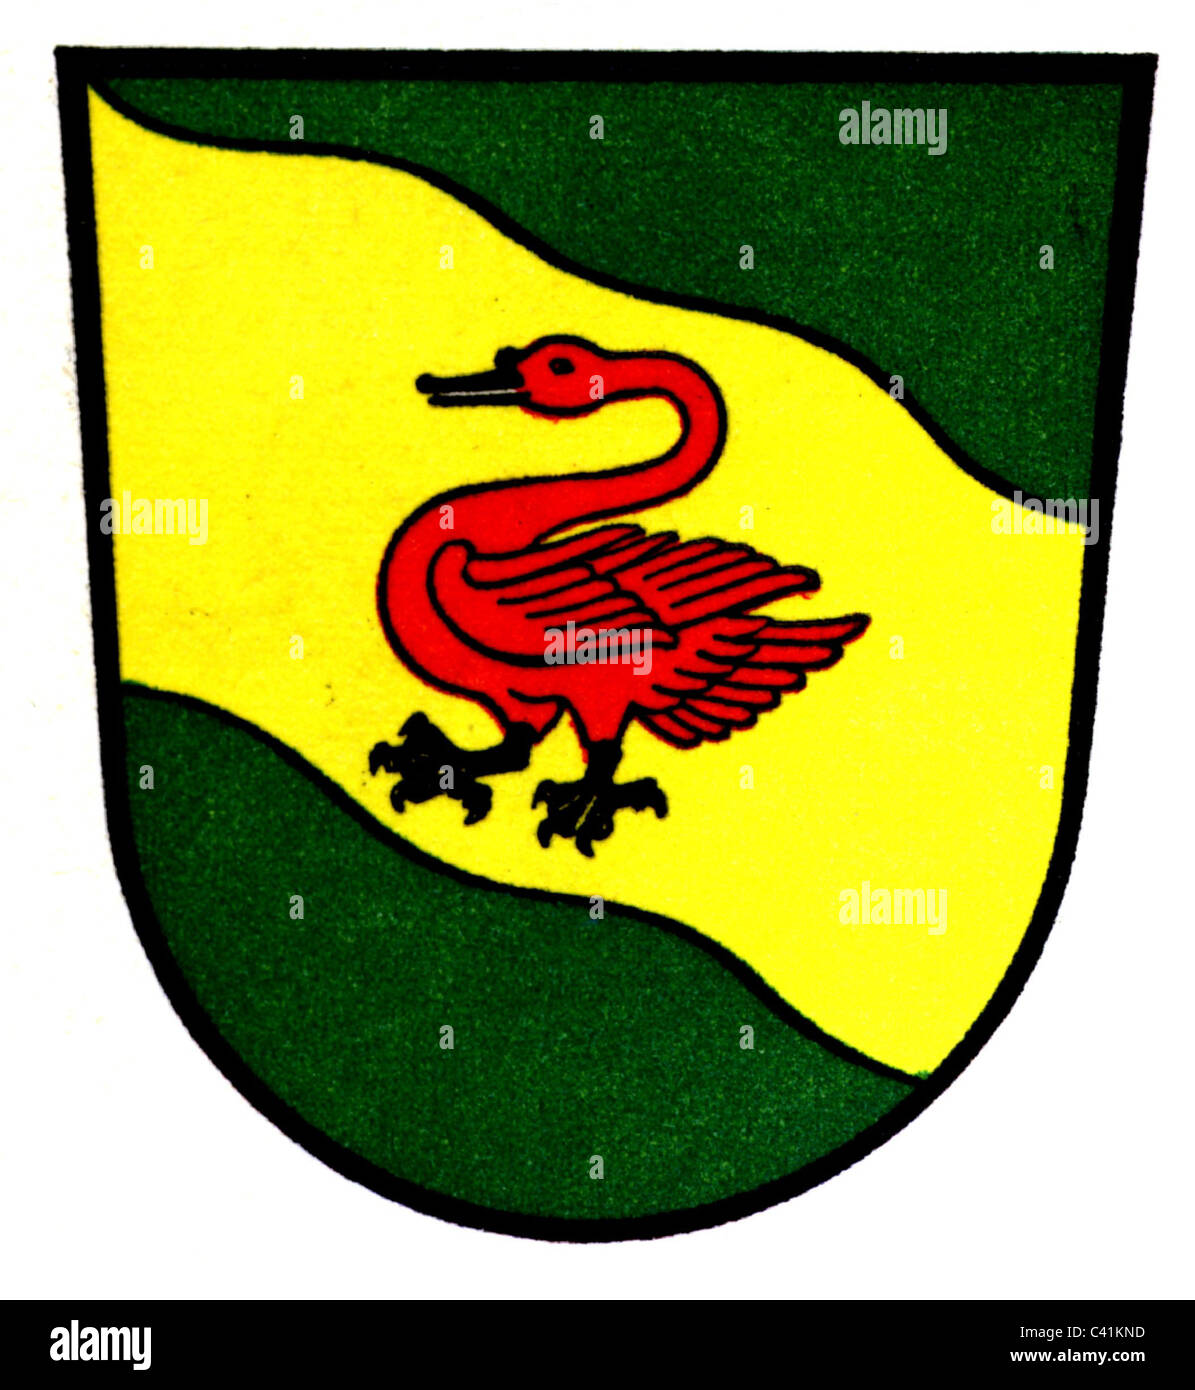 coat of arms / emblems, Gronau, district of Borken, city arms, North Rhine-Westphalia, Germany, heraldry, city, emblem, historic, historical, swan, swans, bird, birds, heraldic animal, heraldic animals, red, yellow, green, North Rhine-Westphalia, North-Rhine, Rhine, Westphalia, Nordrhein-Westfalen, Nordrhein-Westphalen, Additional-Rights-Clearences-Not Available Stock Photo